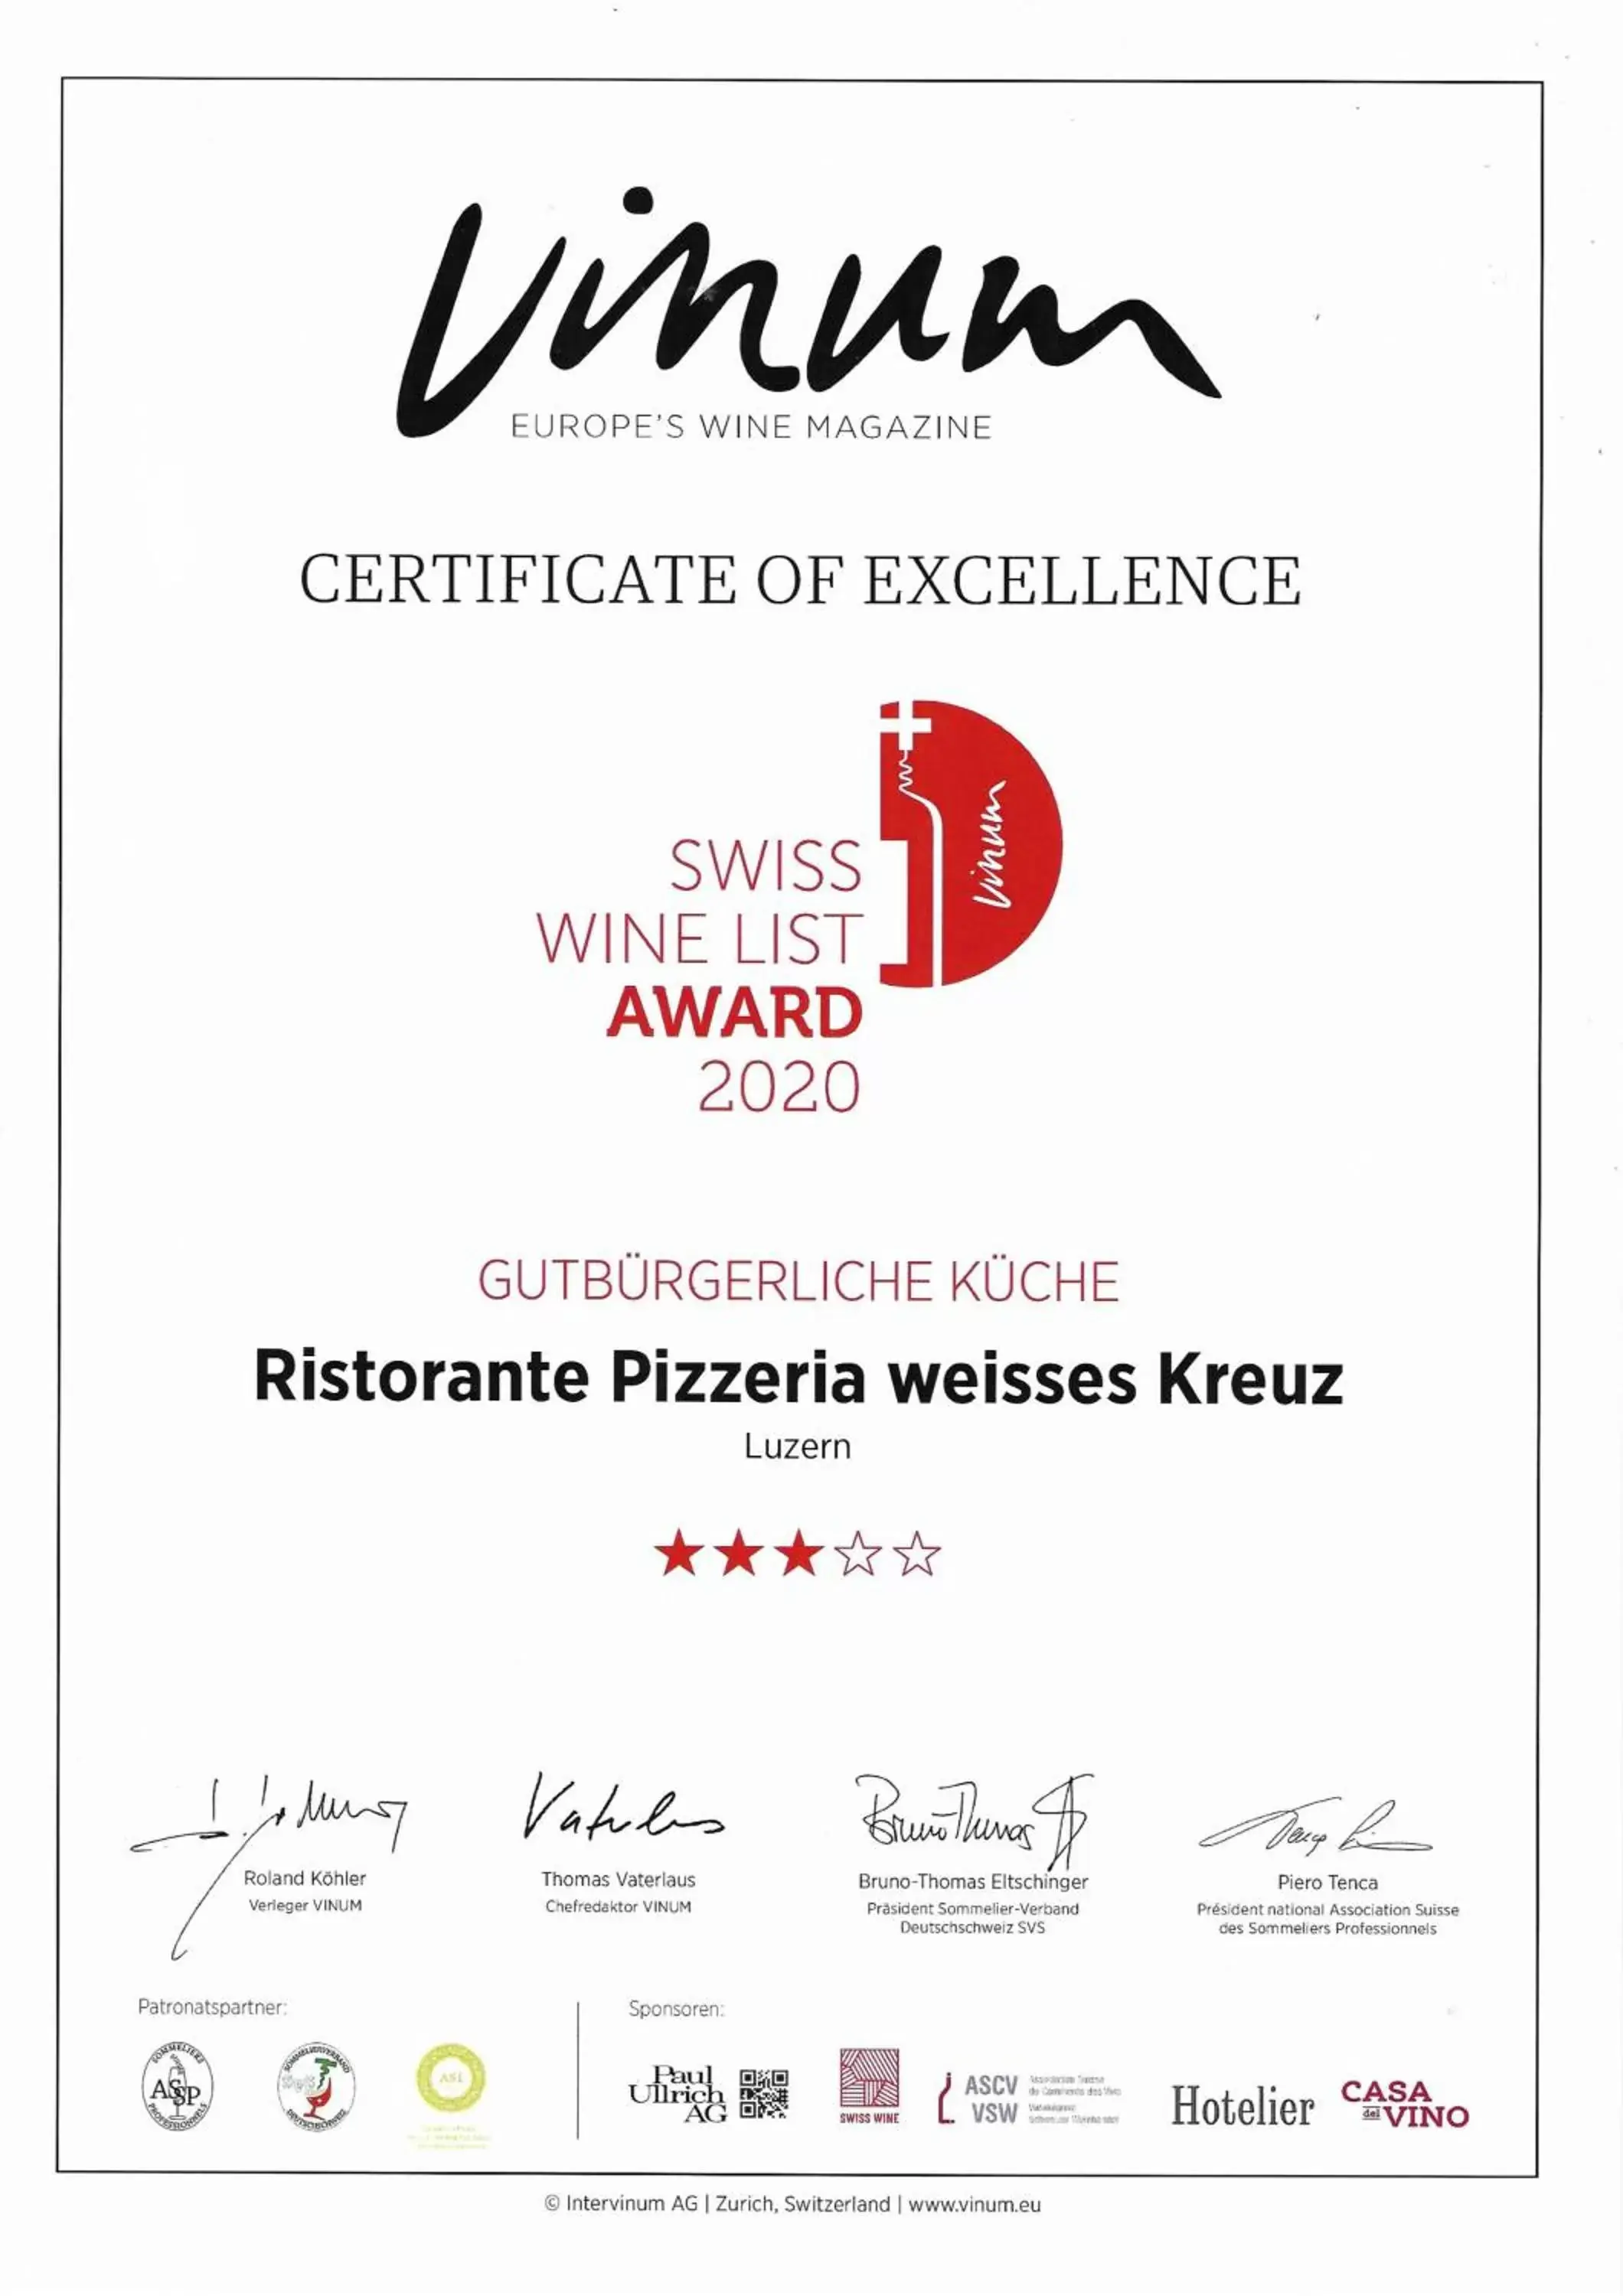 Certificate/Award, Logo/Certificate/Sign/Award in Boutique Hotel Weisses Kreuz - Adult only Hotel